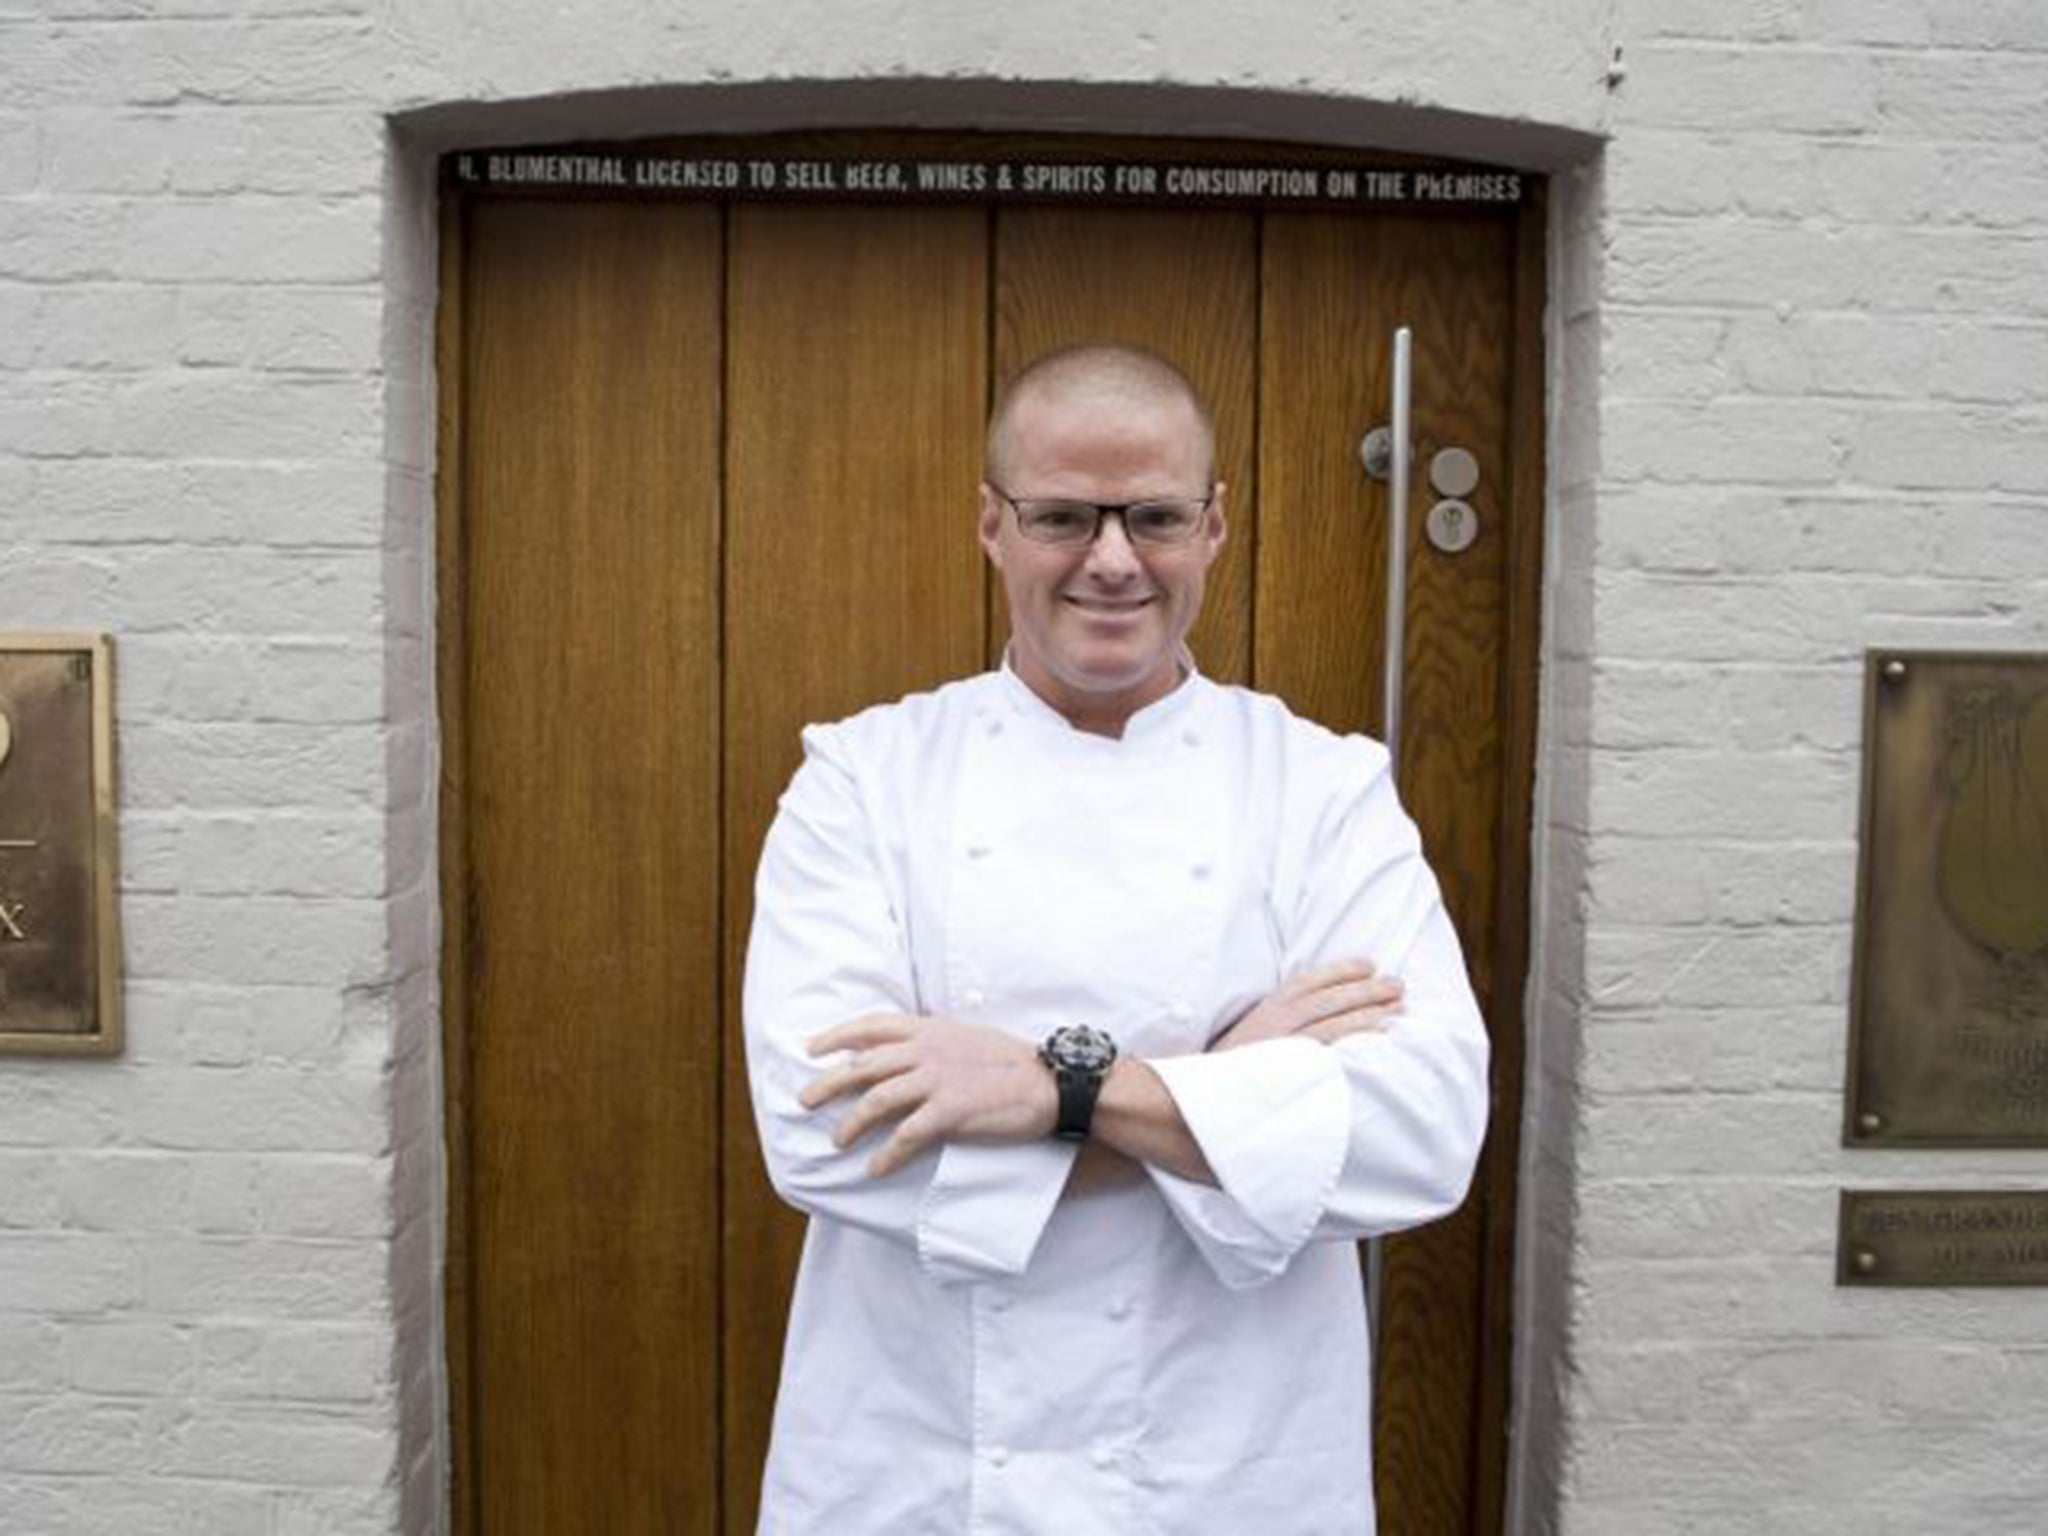 Heston Blumenthal has prepared a special menu, including dishes such as Nova Tiffin Capsule, Rocket Lolly and the Big Breakfast Launch